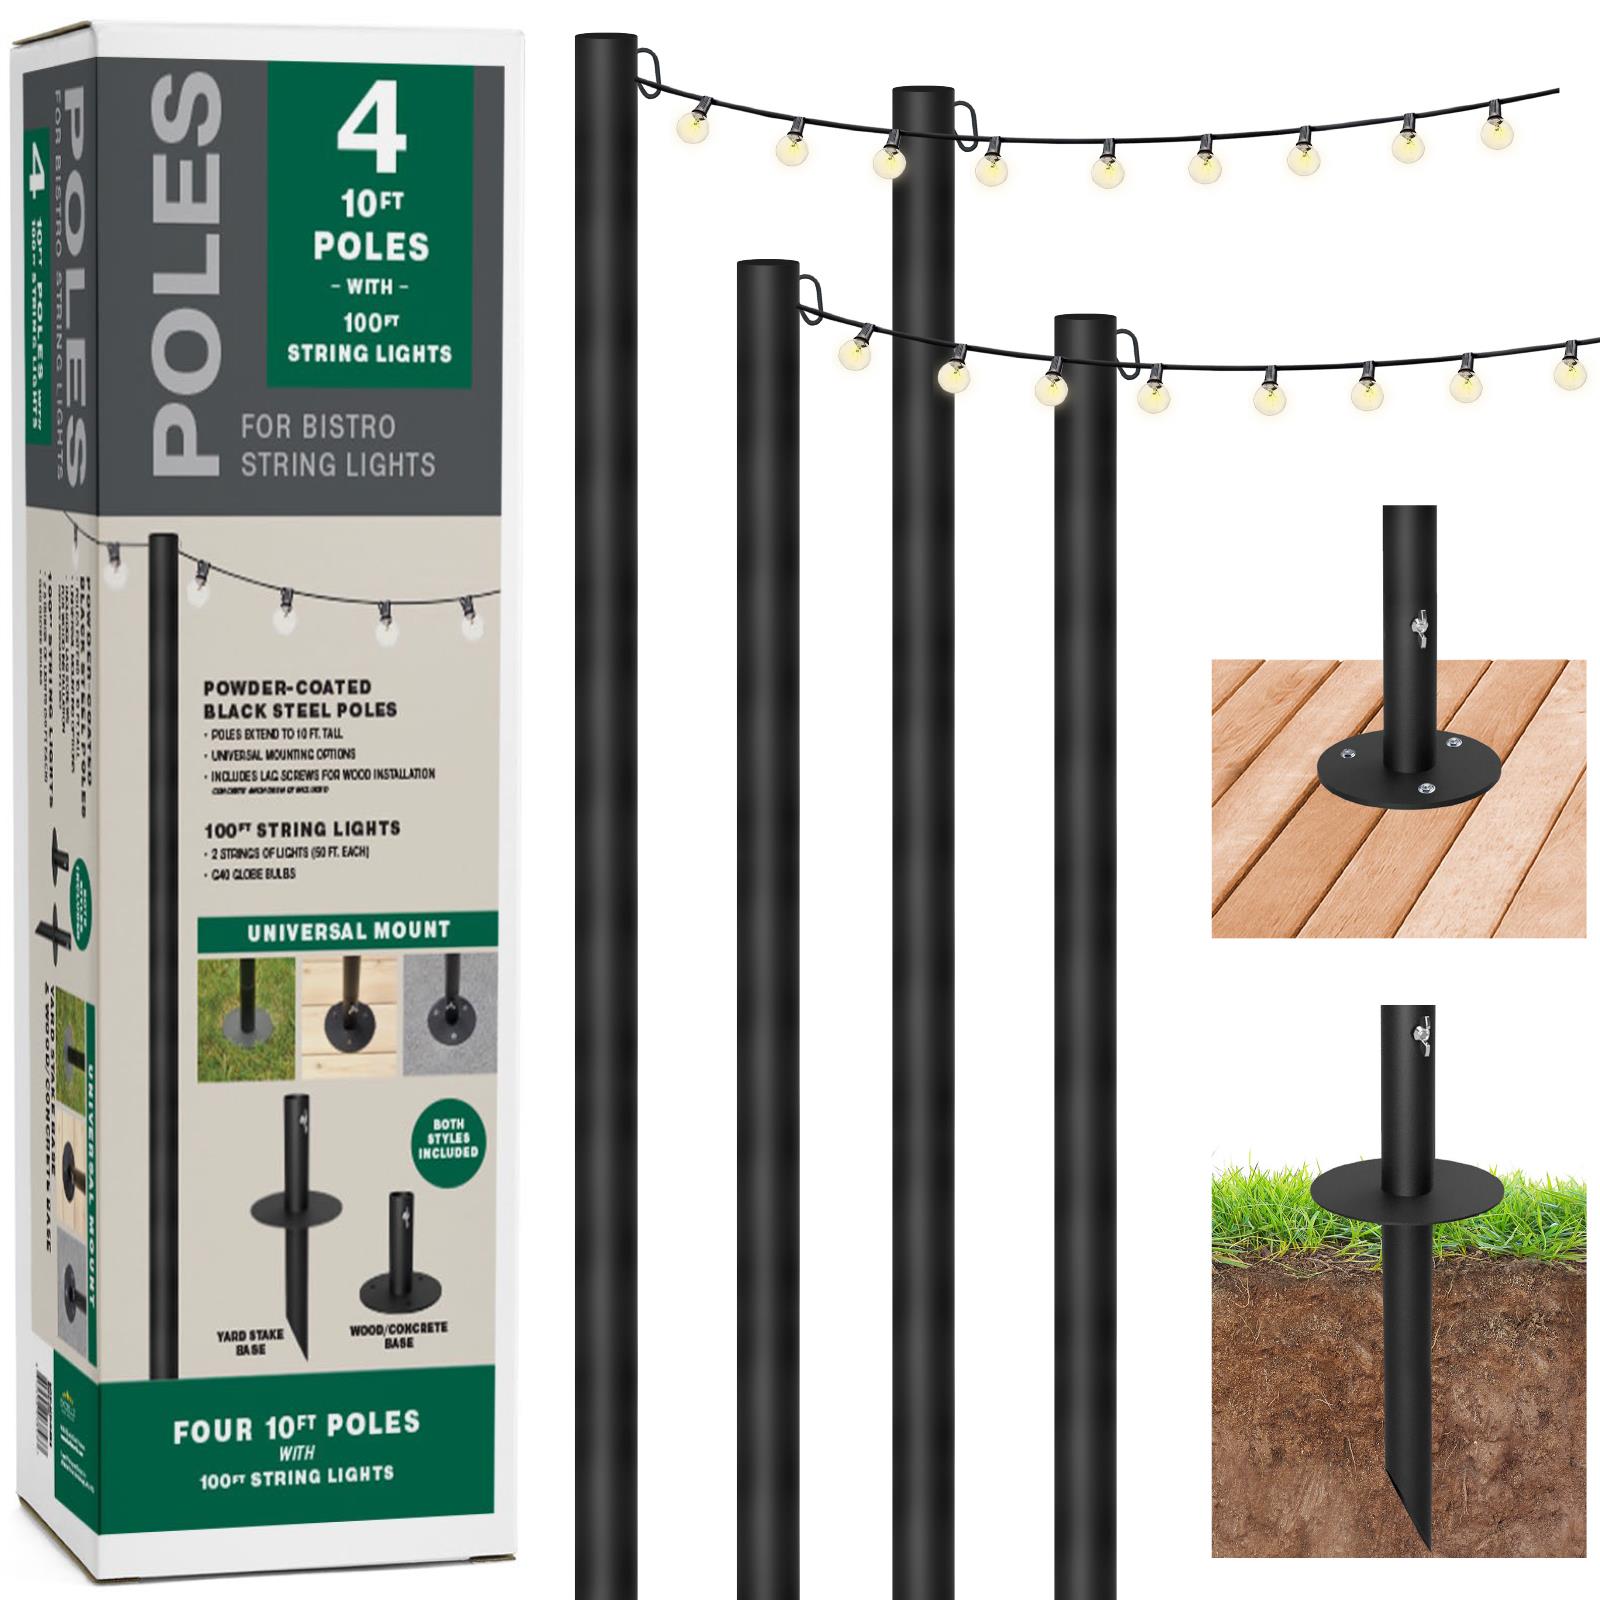 EXCELLO GLOBAL PRODUCTS Bistro 10' String Light Poles (4-pack) with 100'  String Lights Included